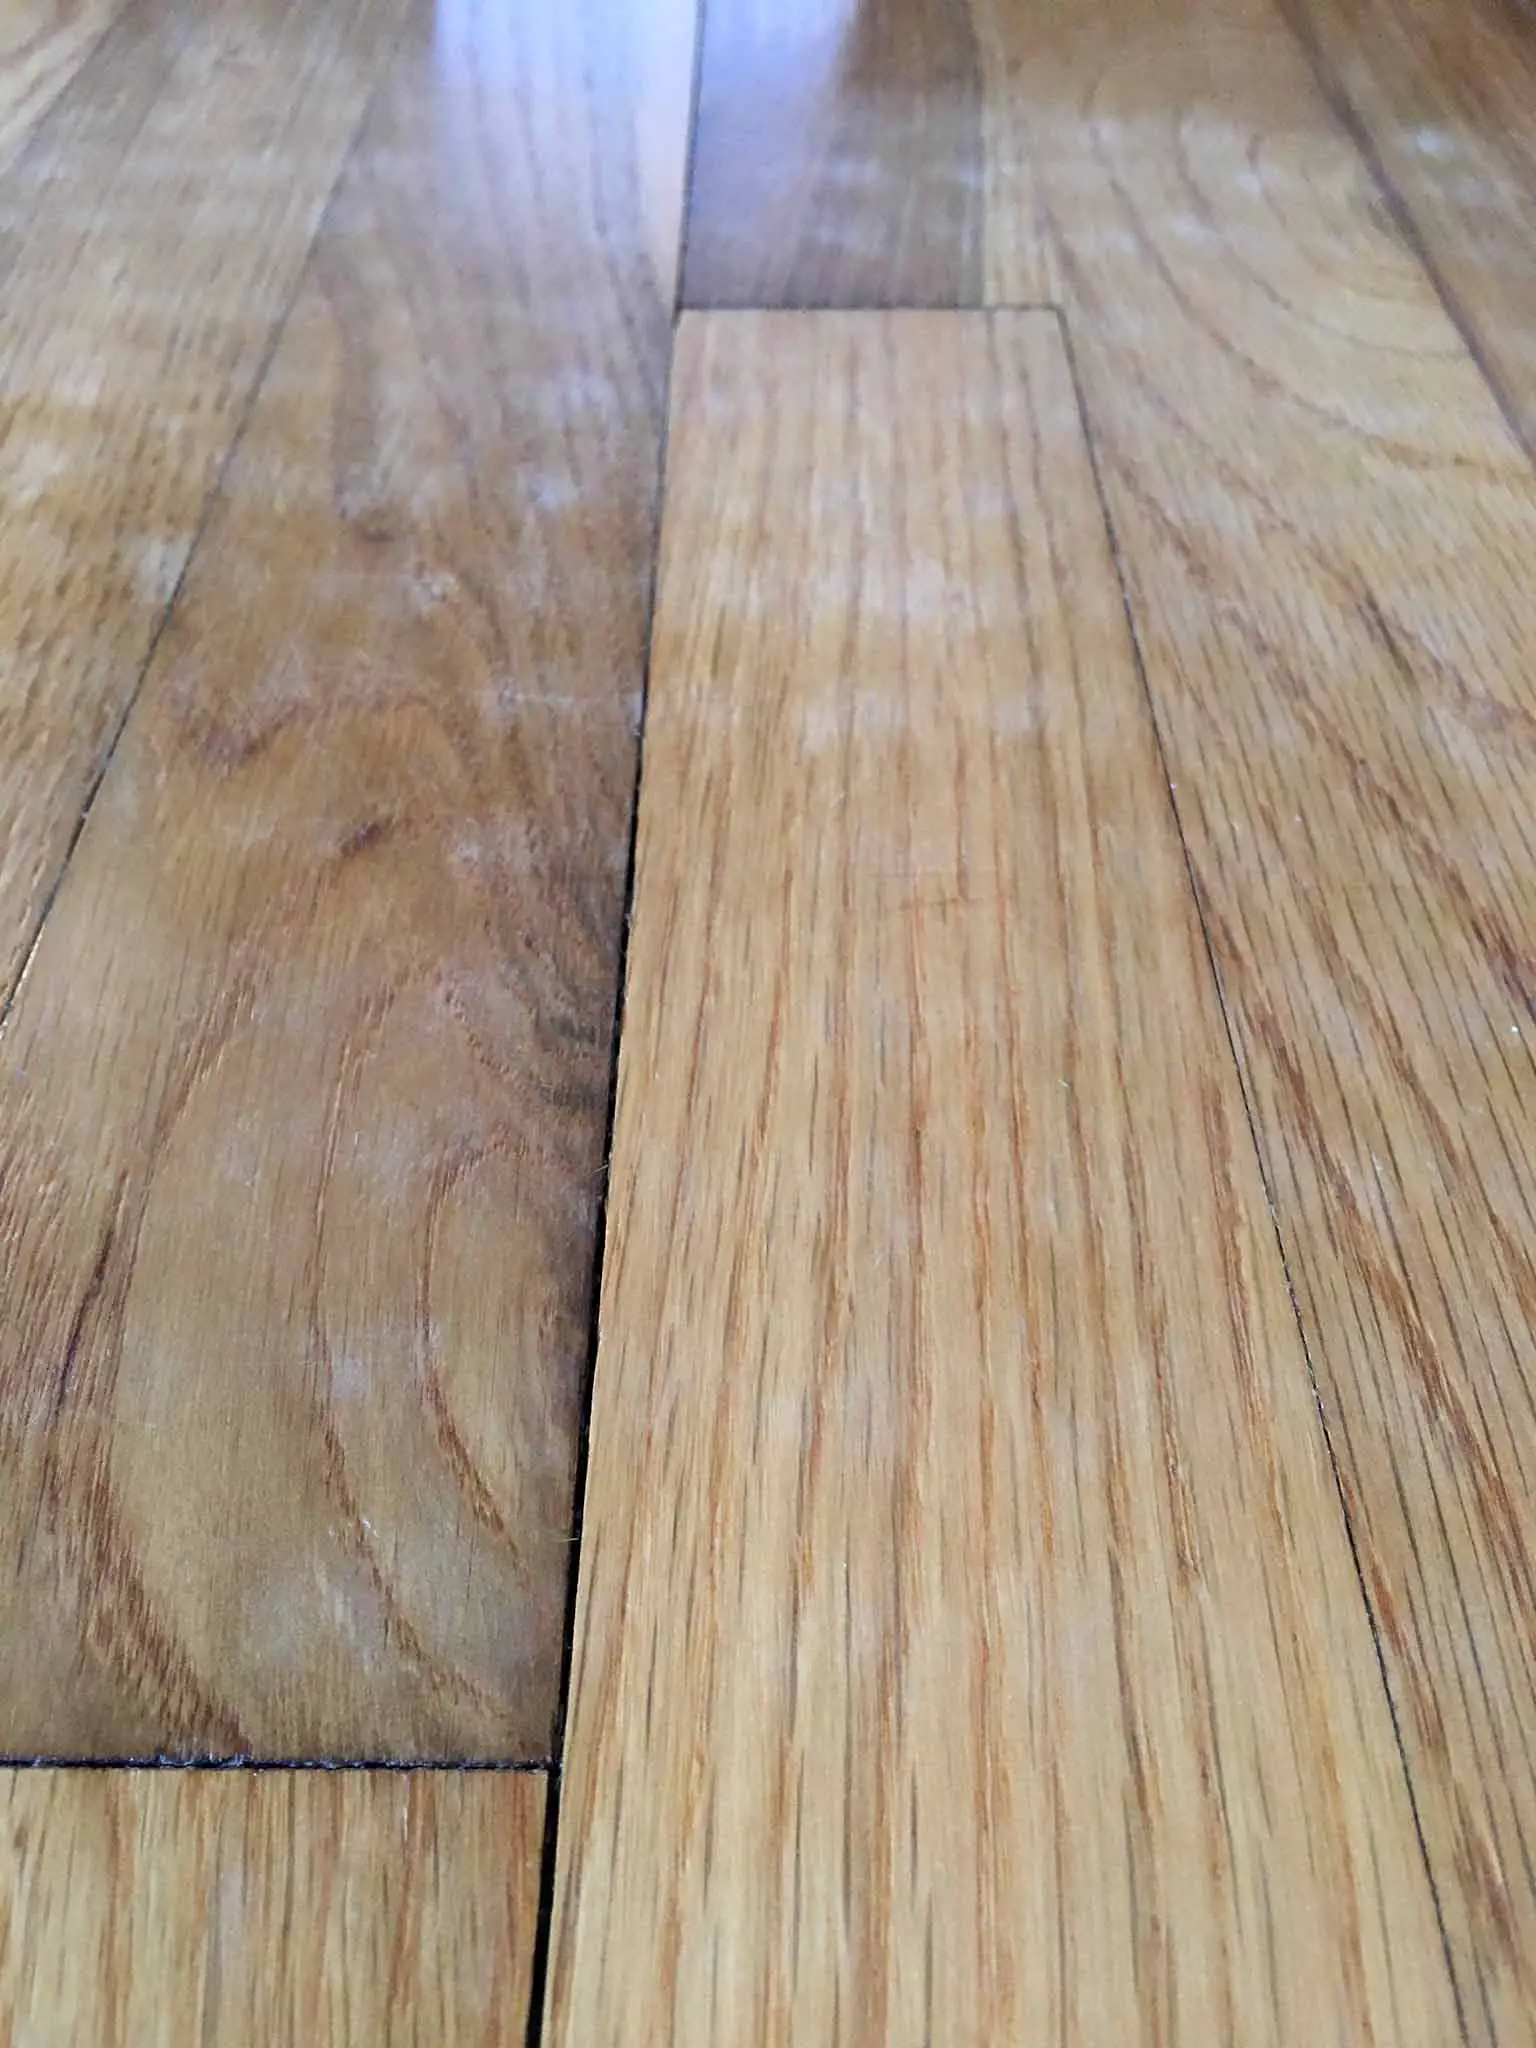 How I Wrecked My Hardwood Floors And, How To Clean Hardwood Floors After Removing Area Rug